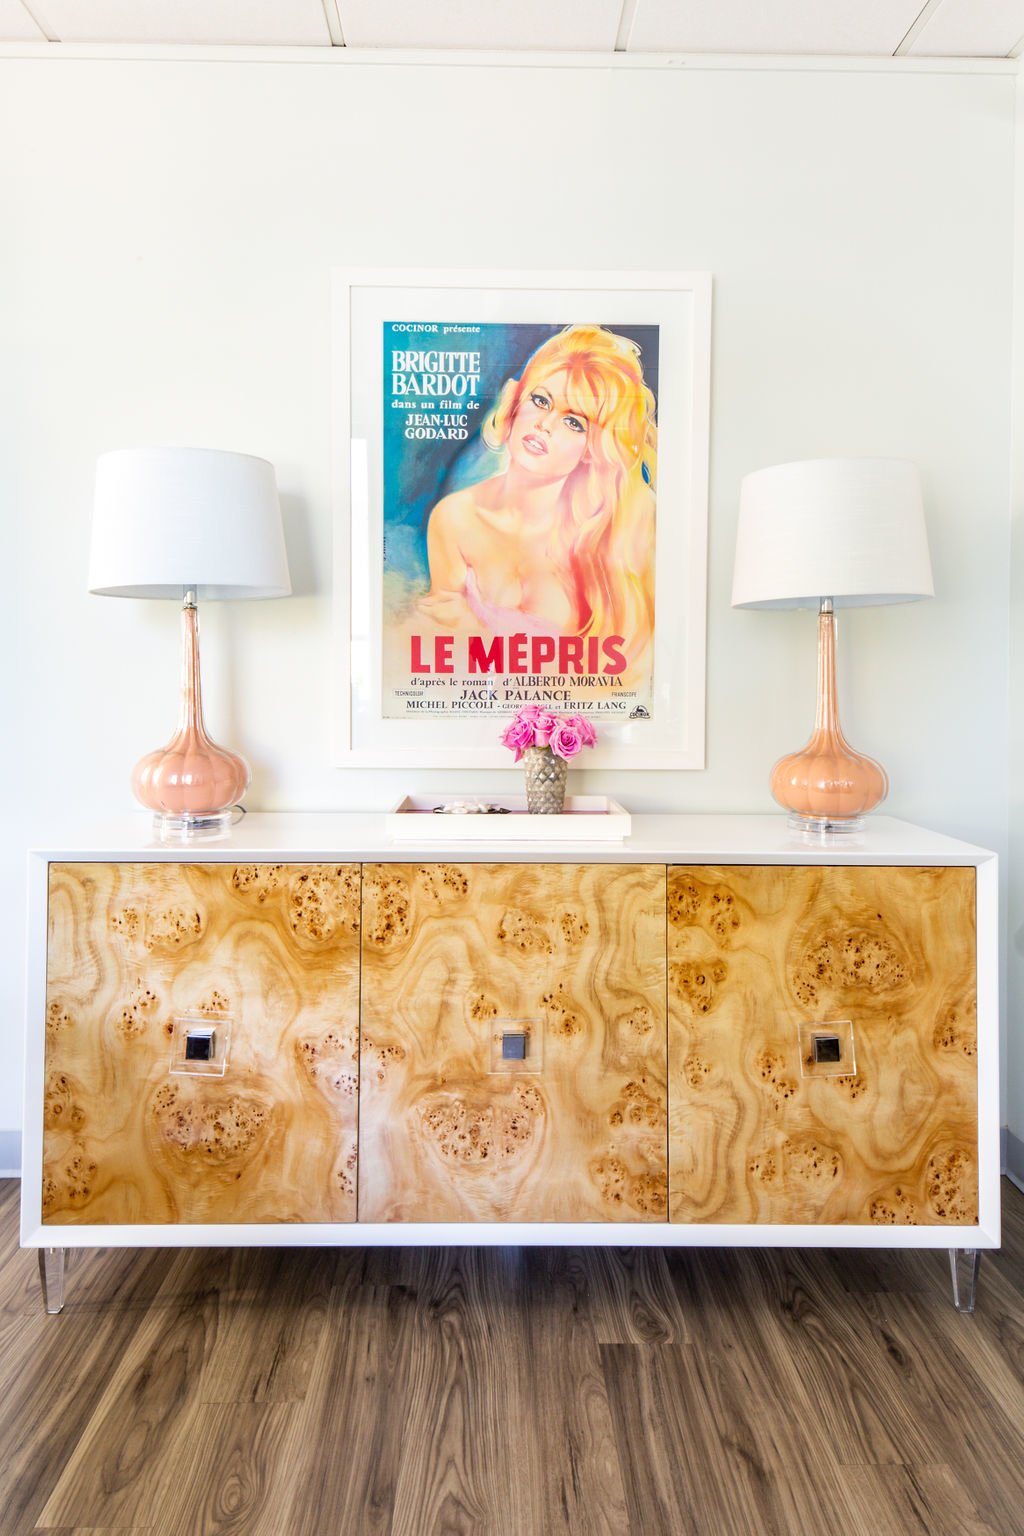 Burled wood credenza with pink lamps